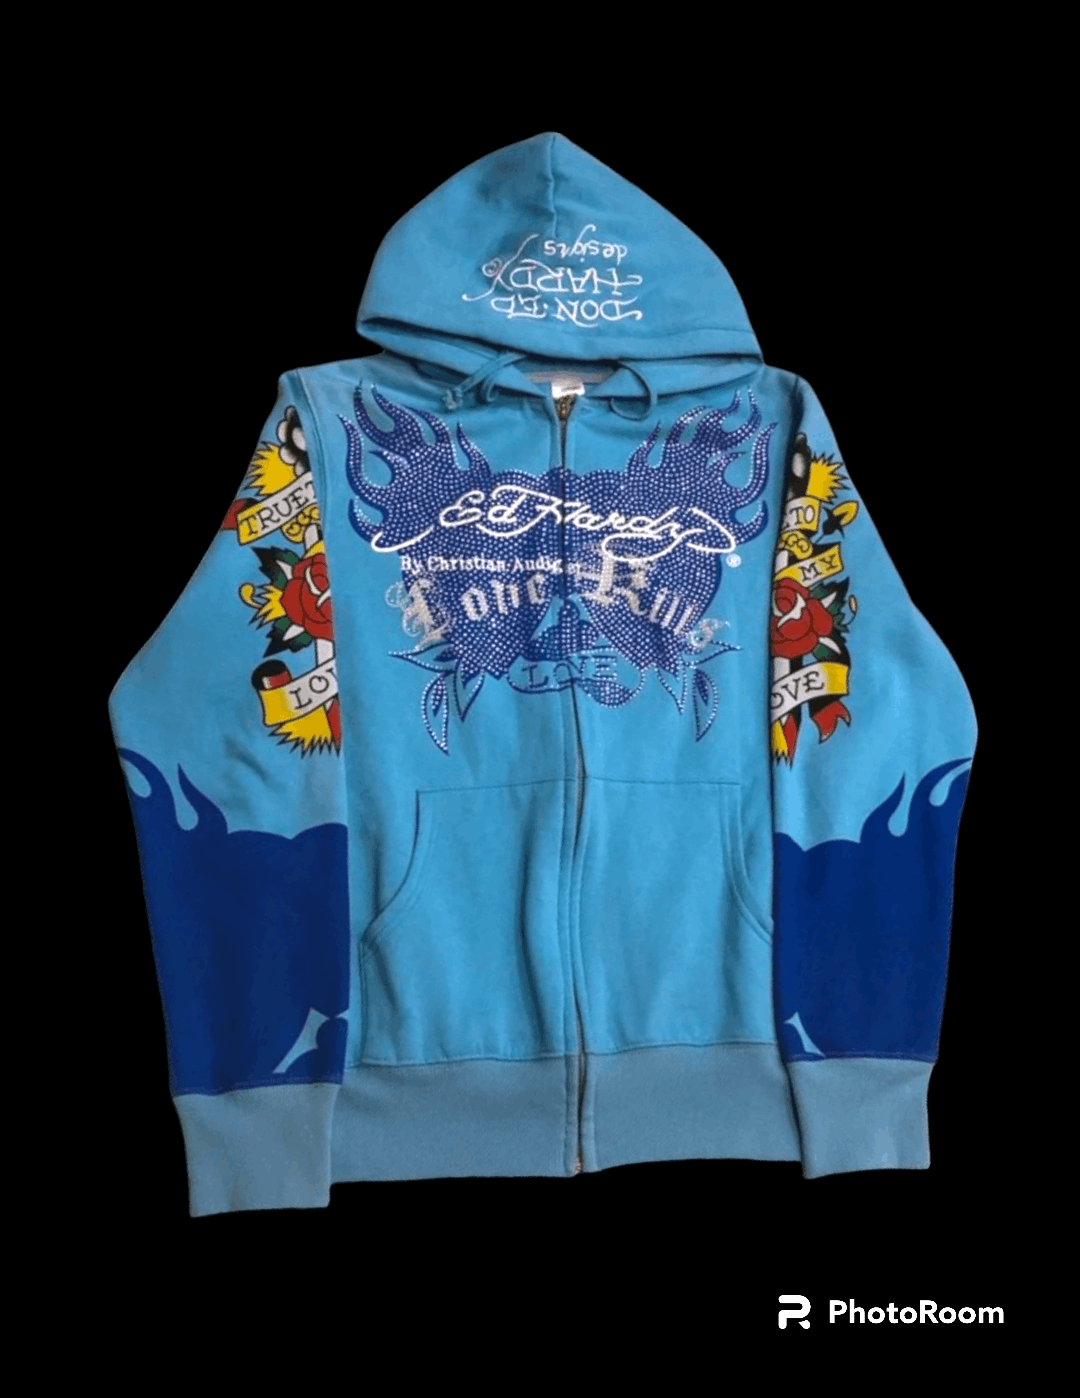 Pre-owned Artful Dodger X Christian Audigier Blue Ed Hardy Zip Up Hoodie With Embroidery And Print "love" (size Small)